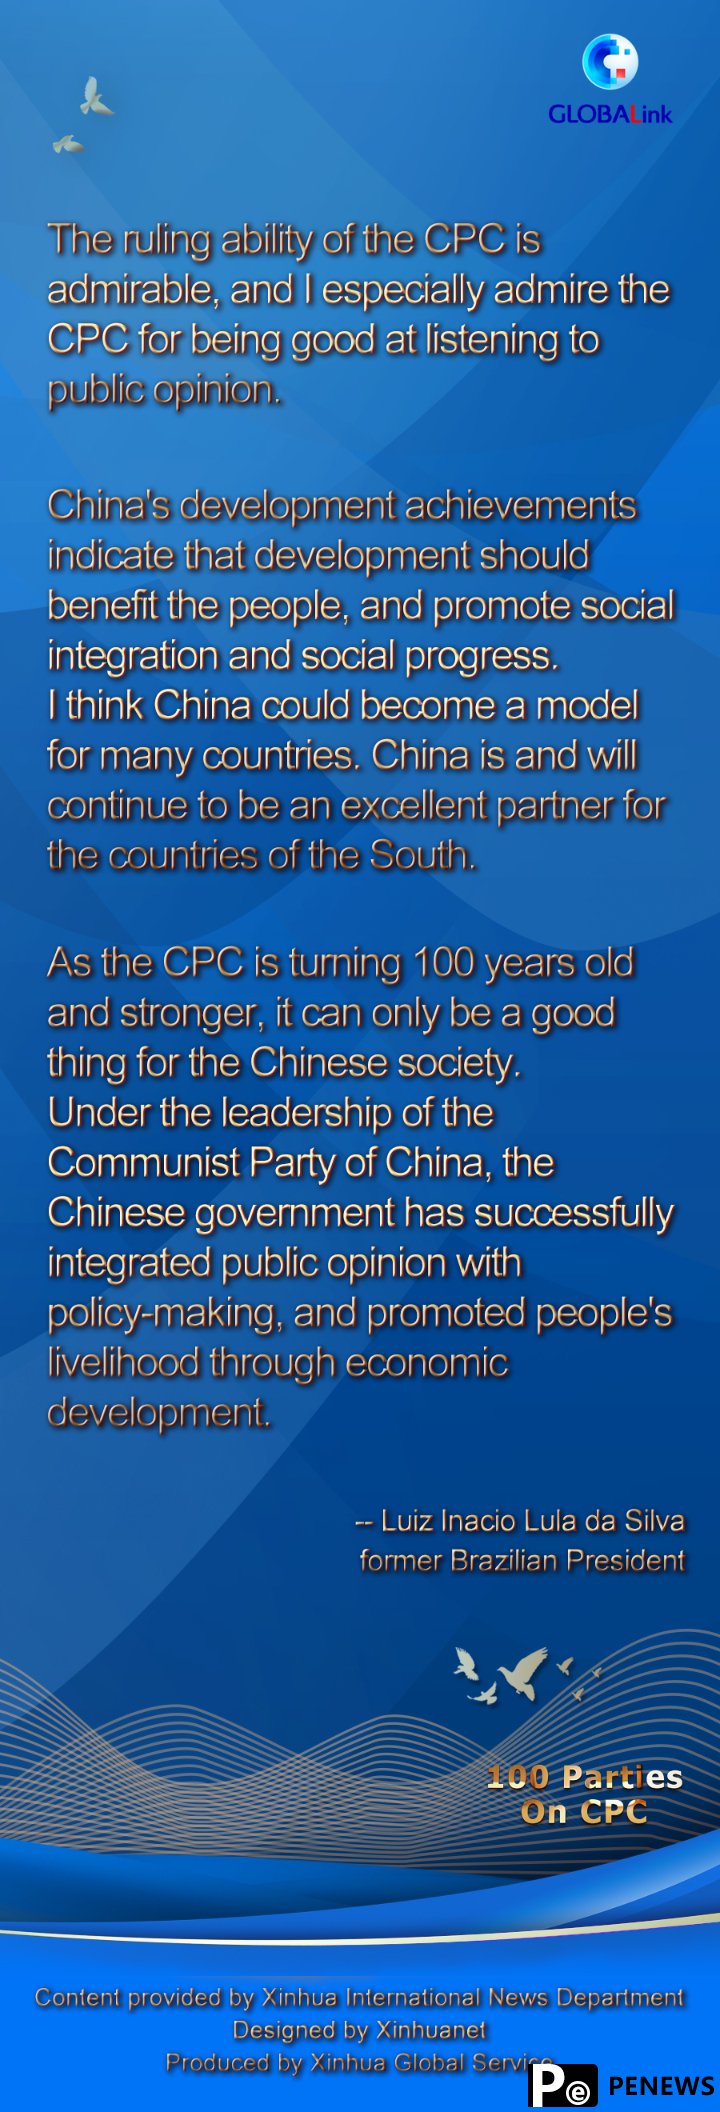 Interview: CPC committed to ensuring extensive public participation in economic growth, says former Brazilian president